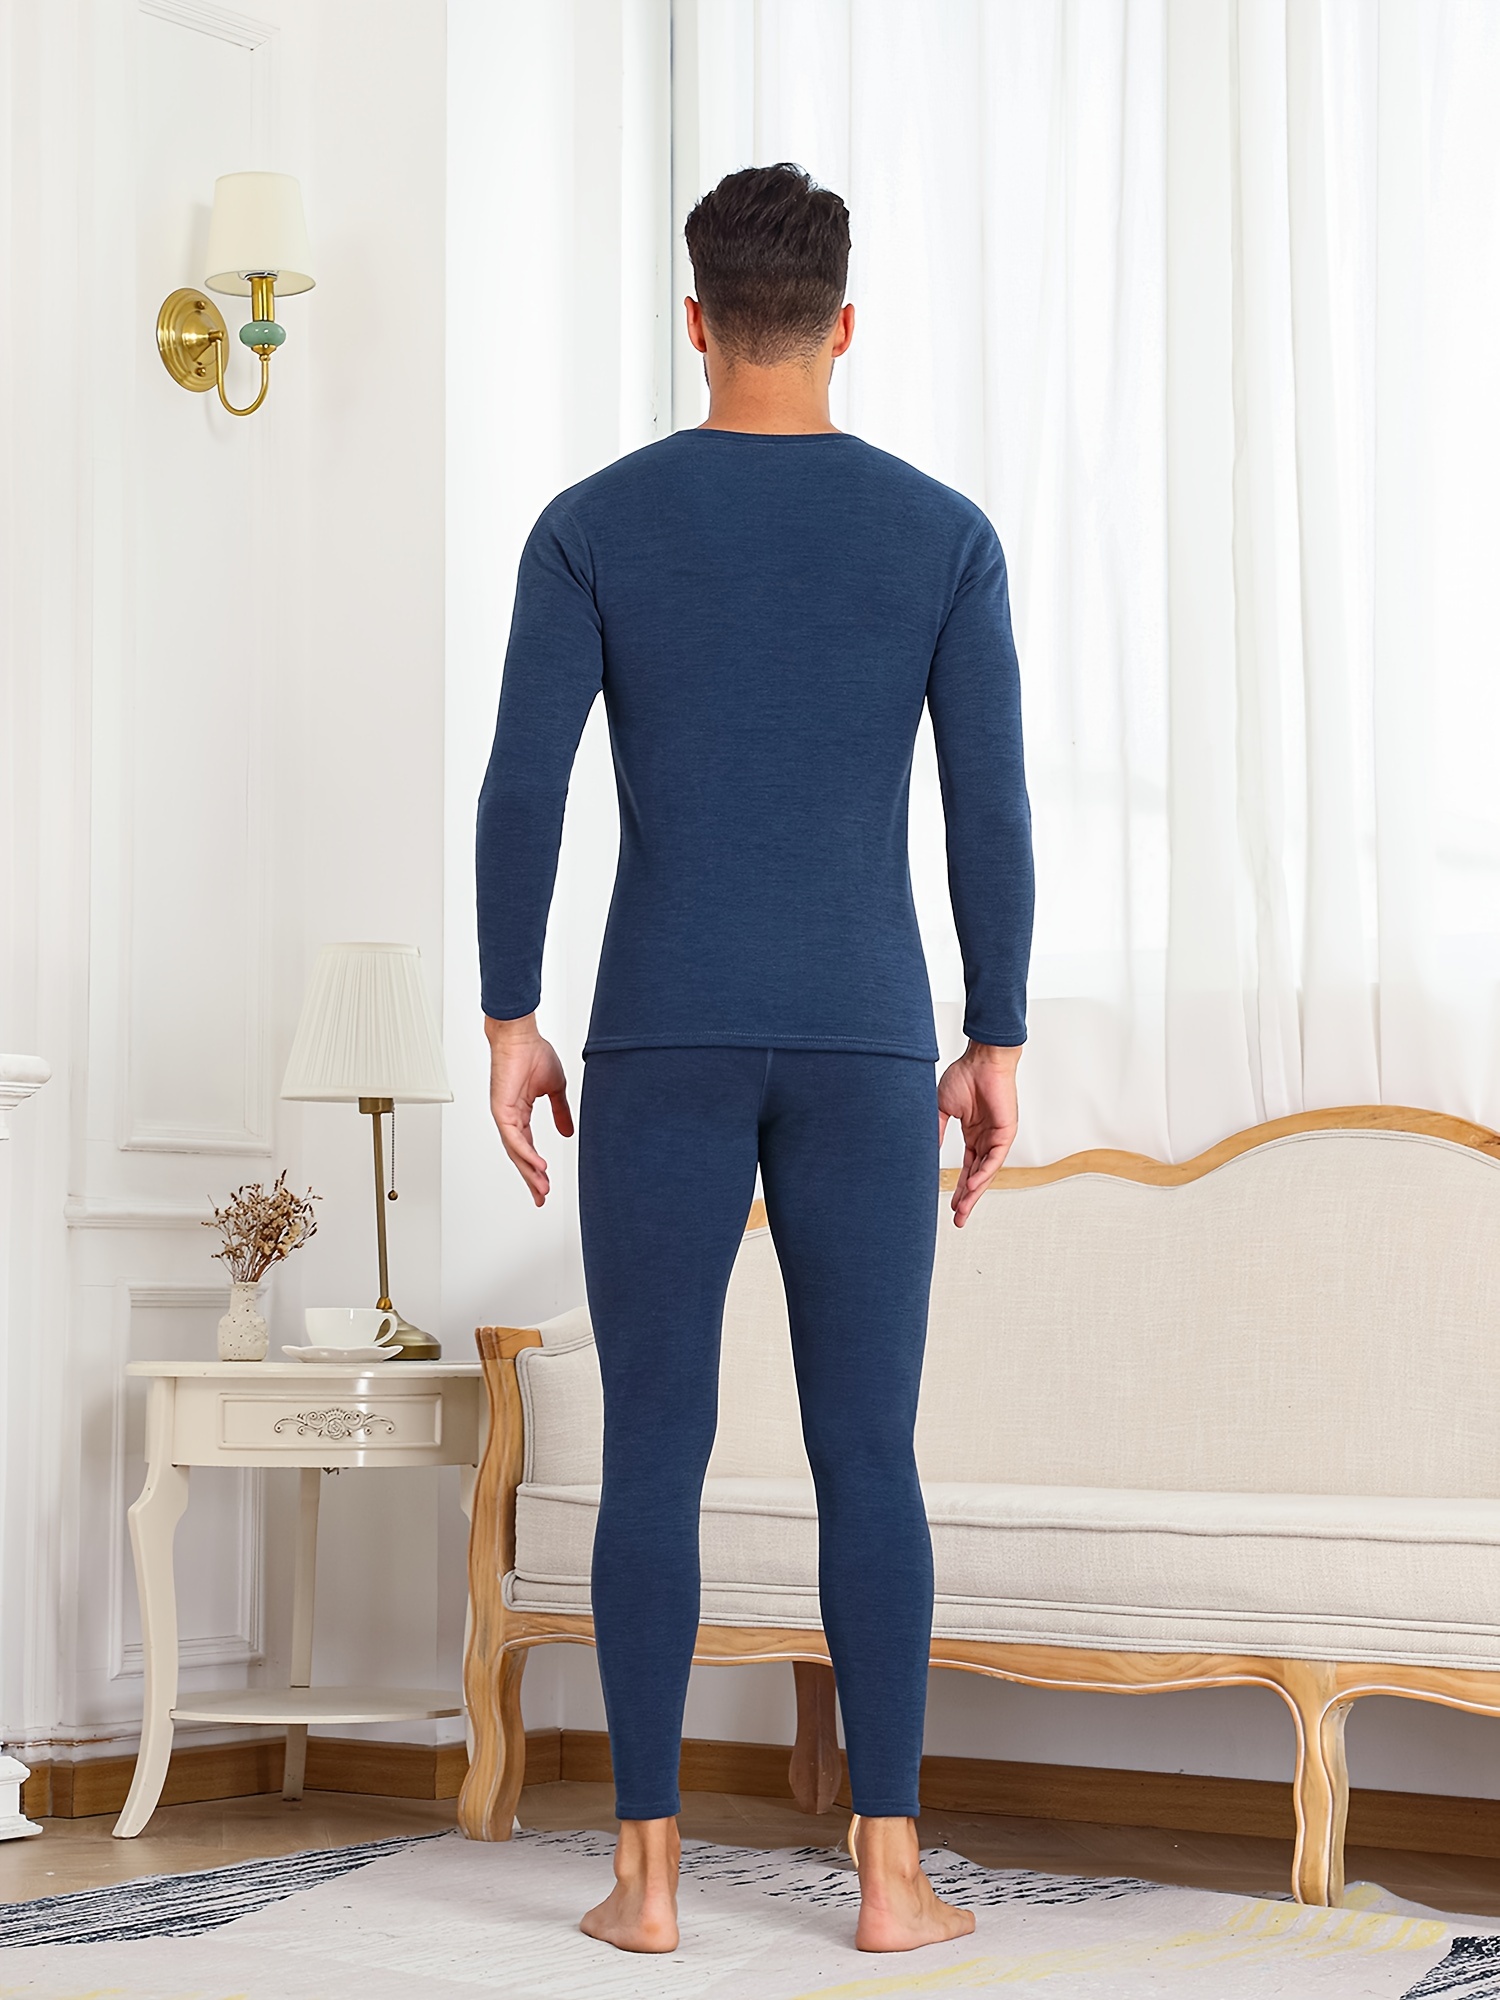 Men Thick Inner Wear Thermal Underwear Long Johns Pajama Set Winter Warm  Velvet Tops Pant 2 Piece Outfits 